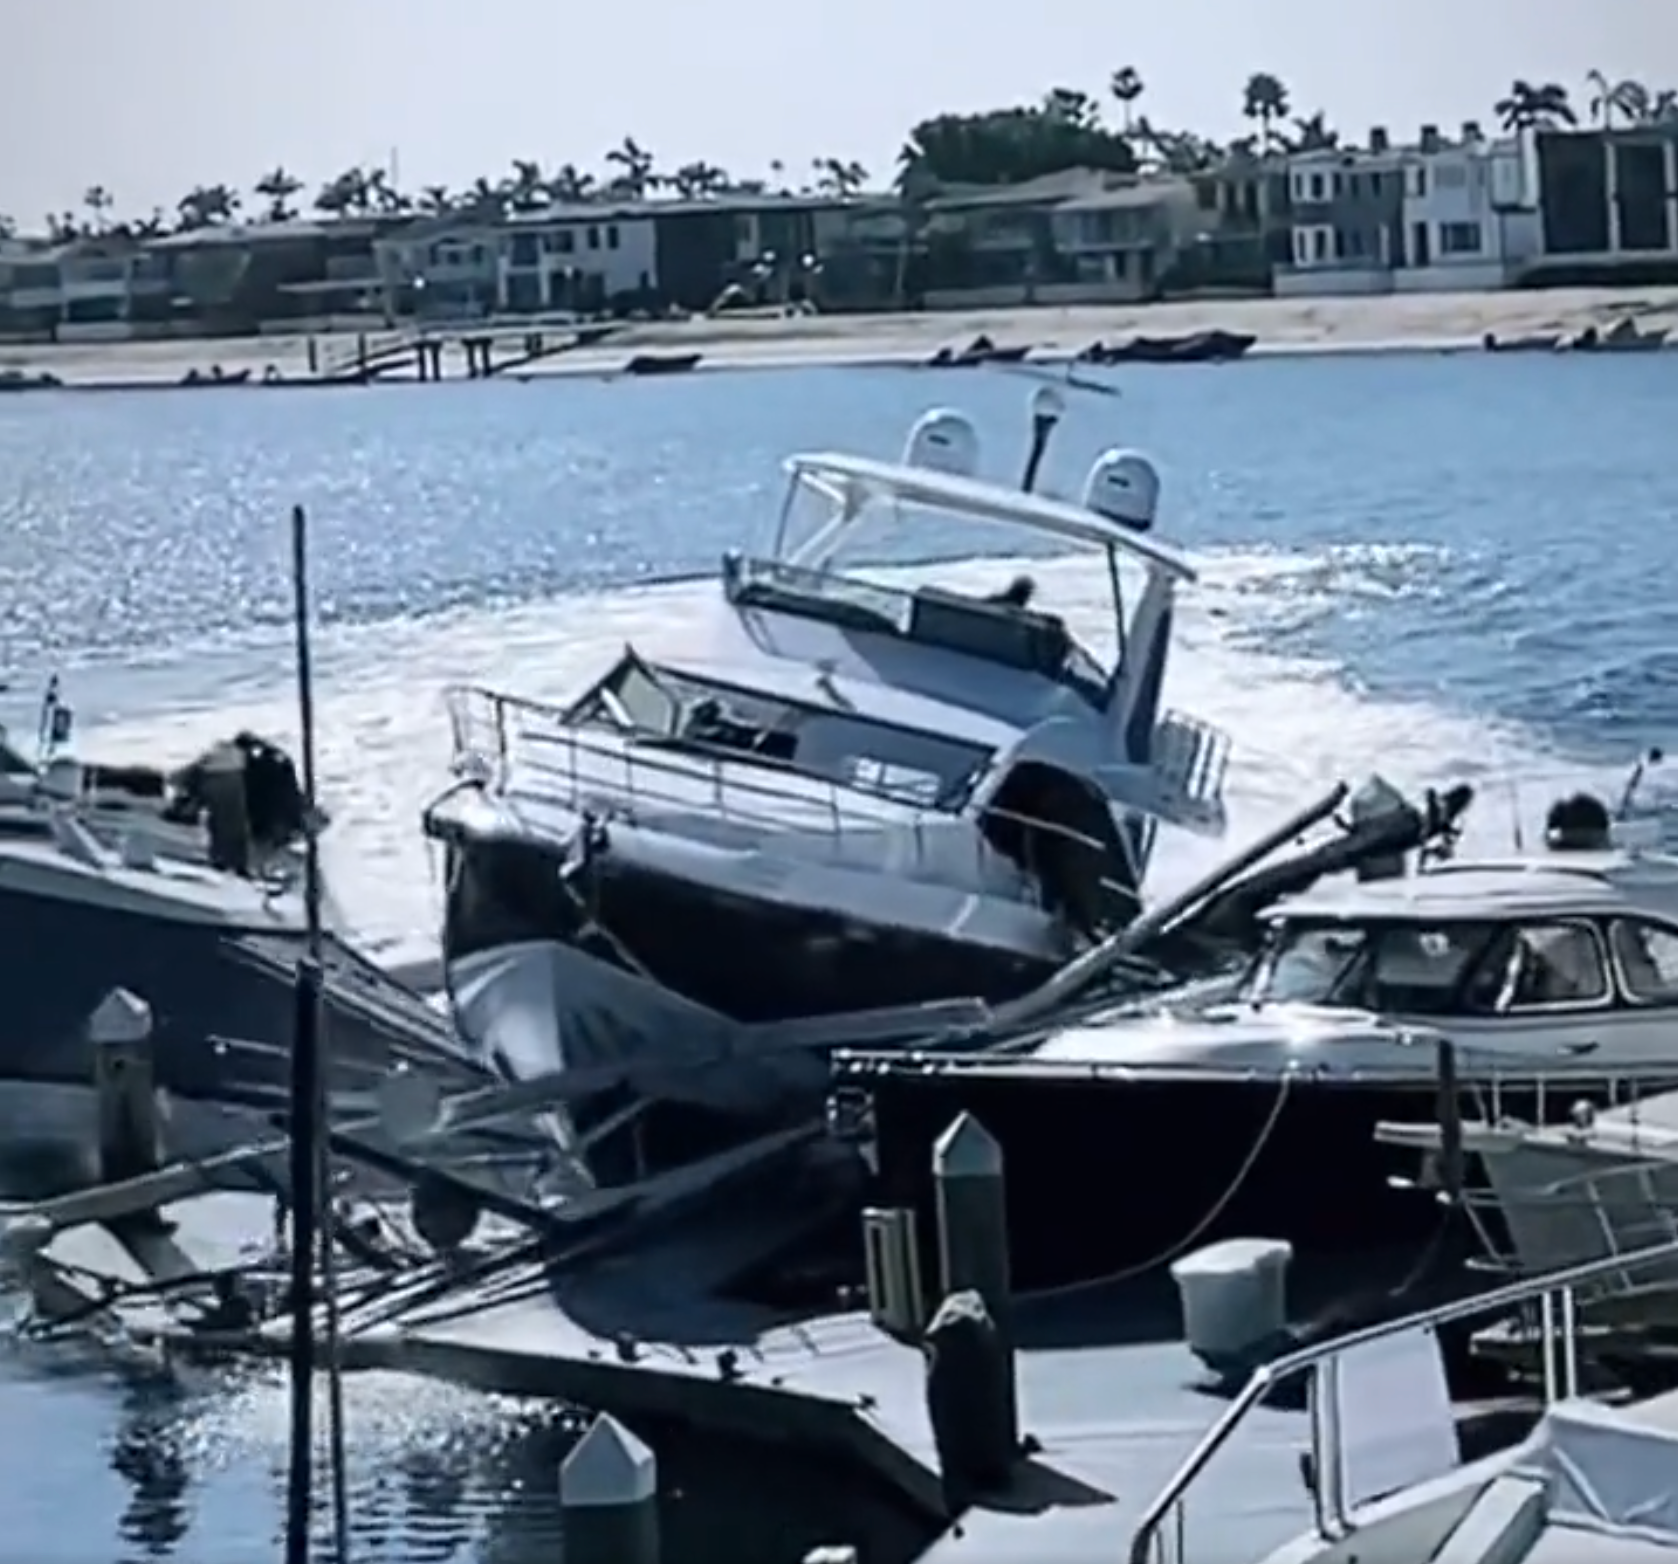 A stolen yacht smashed into several boats and a dock in Newport Beach Harbor, California